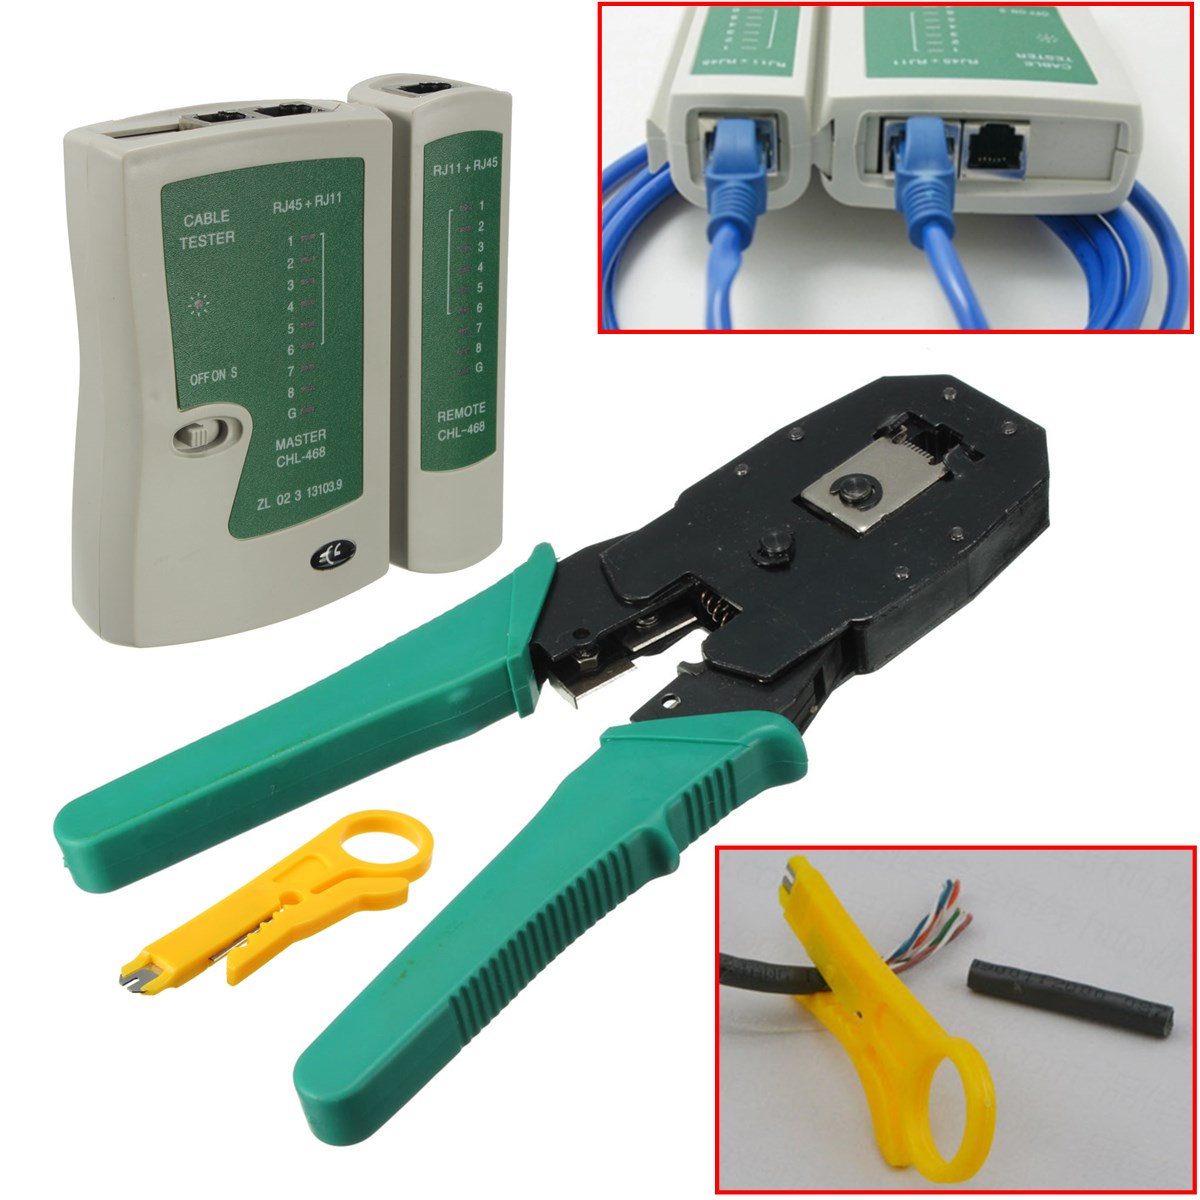 cat5 cable tester instructions